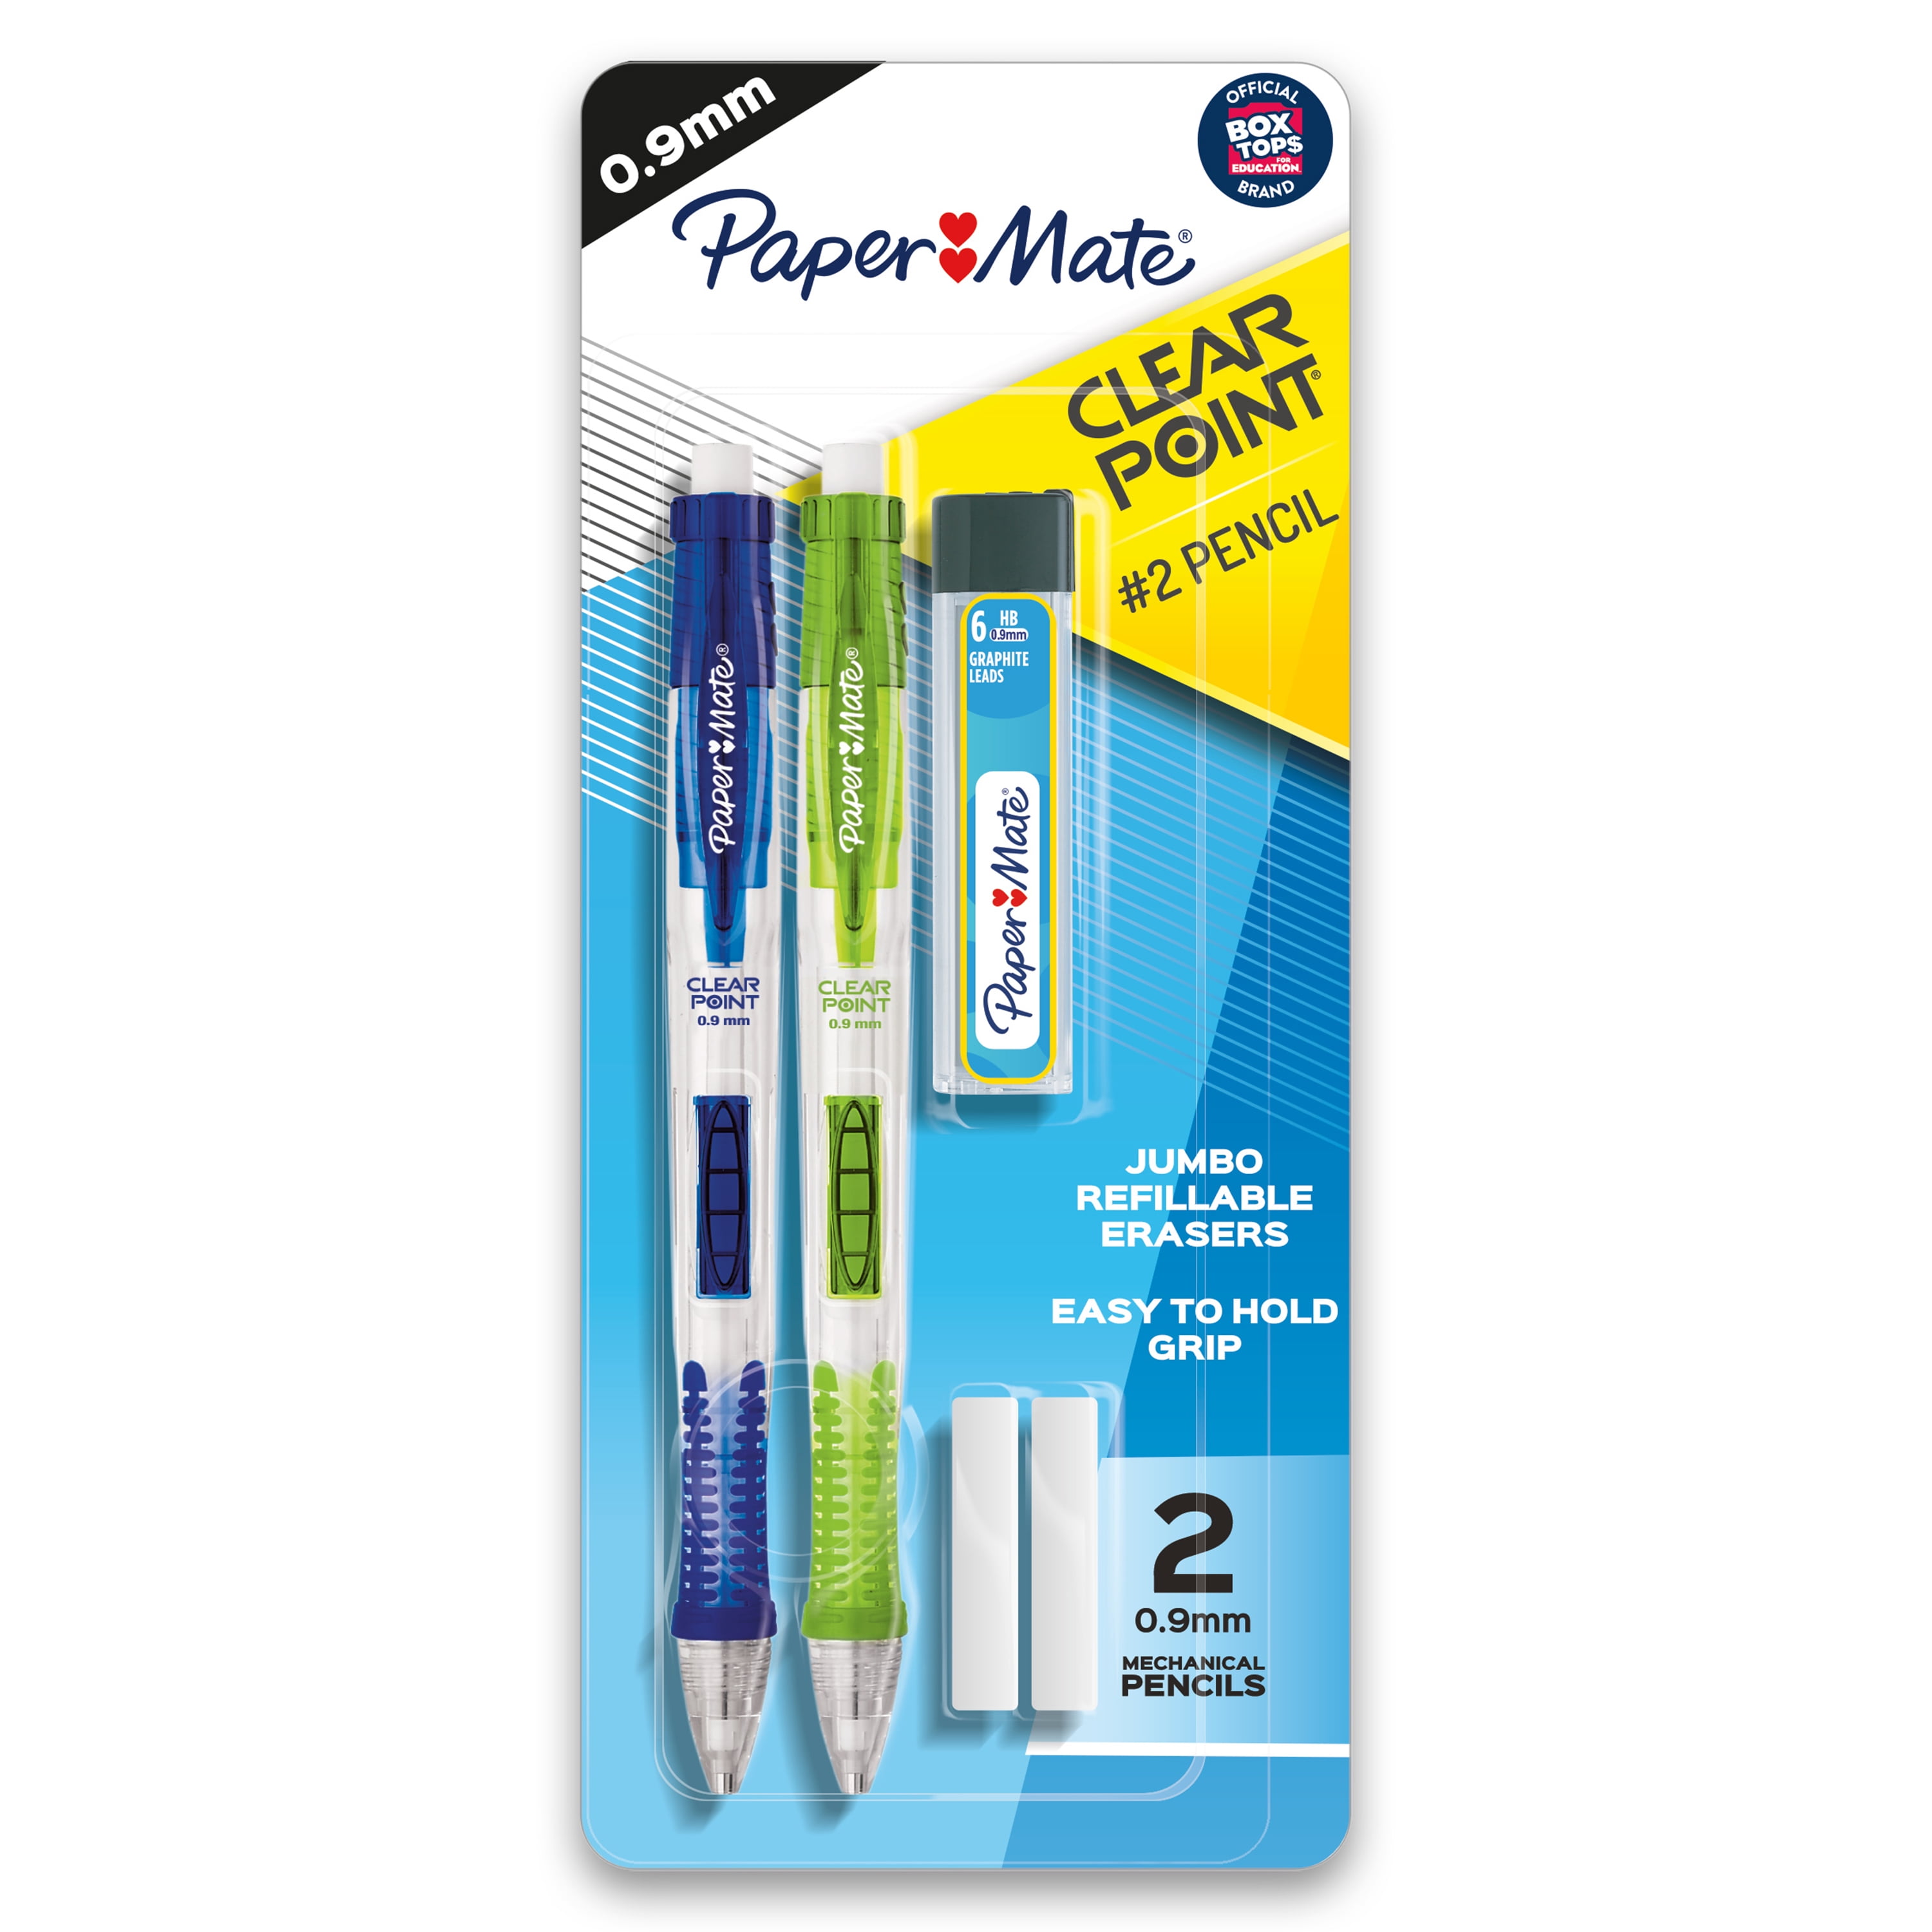 Paper Mate Clearpoint Mechanical Pencils, HB #2 Lead (0.9mm), Assorted Barrel Colors, 2 Pencils, 1 Lead Refill Set, 2 Erasers